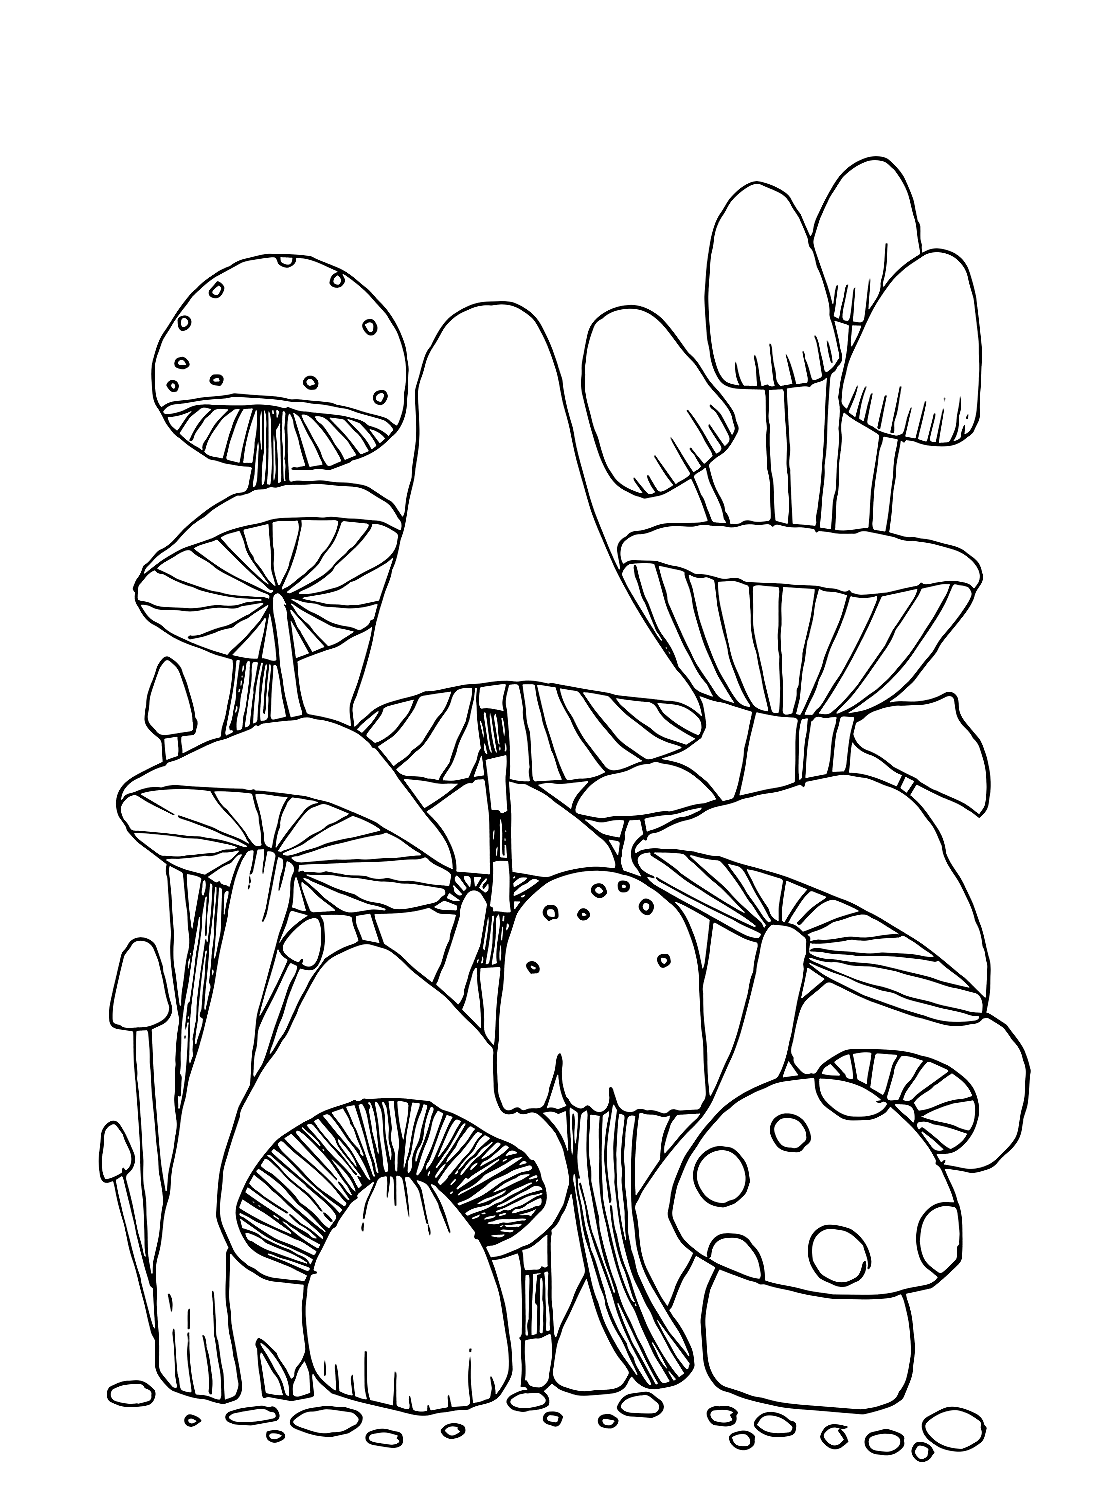 Coloring pages of Mushroom